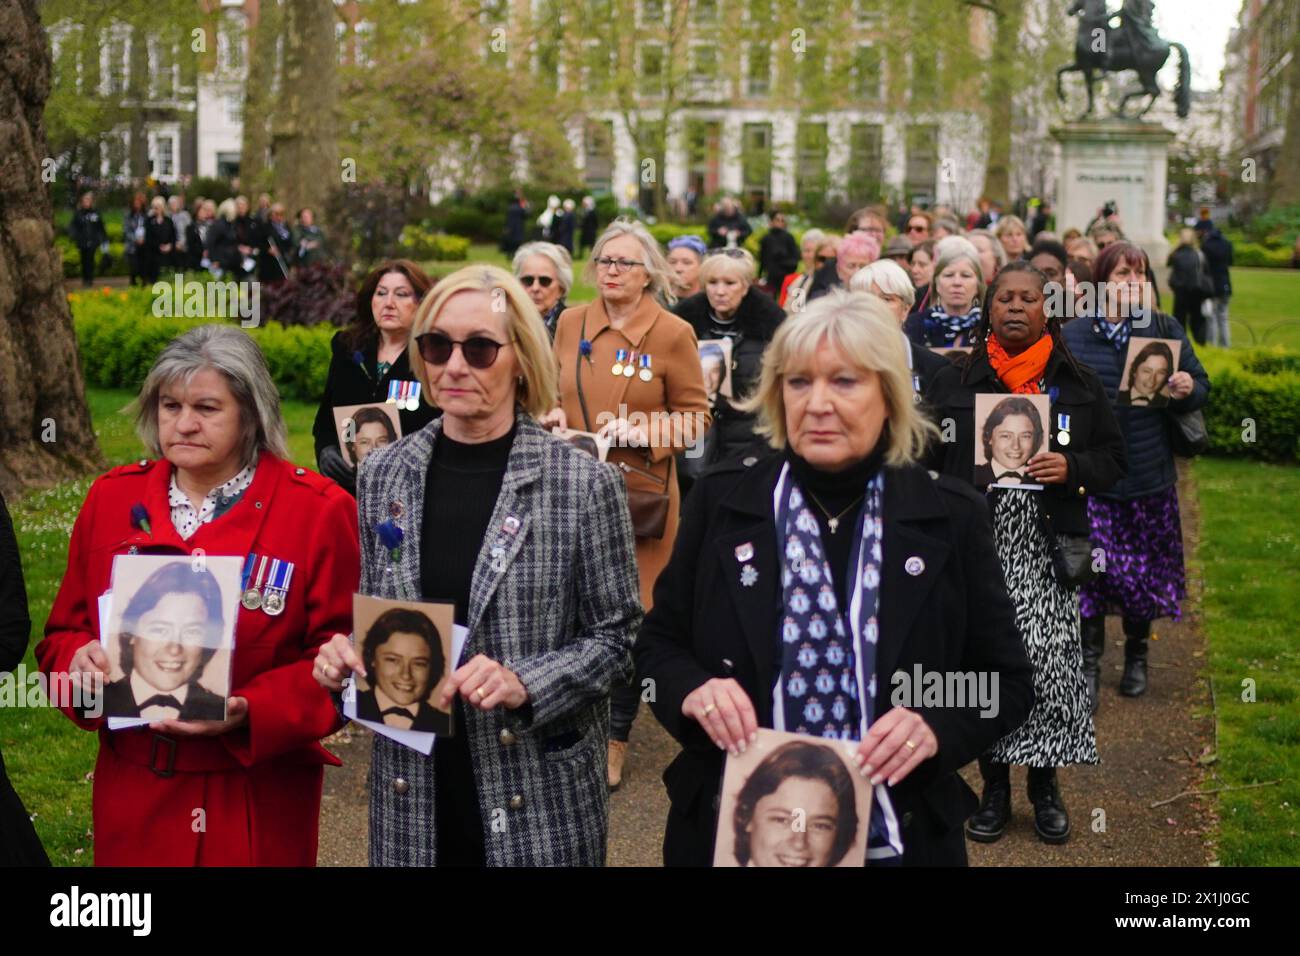 Colleagues of Pc Yvonne Fletcher hold photos of her during a procession around St James's Square, London, ahead of a 40th anniversary memorial service. Pc Fletcher was murdered on 17 April 1984 by a shot fired from the Libyan embassy in St James's Square, London, after she had been deployed to monitor a demonstration against the then Libyan leader Muammar Gaddafi. Picture date: Wednesday April 17, 2024. Stock Photo